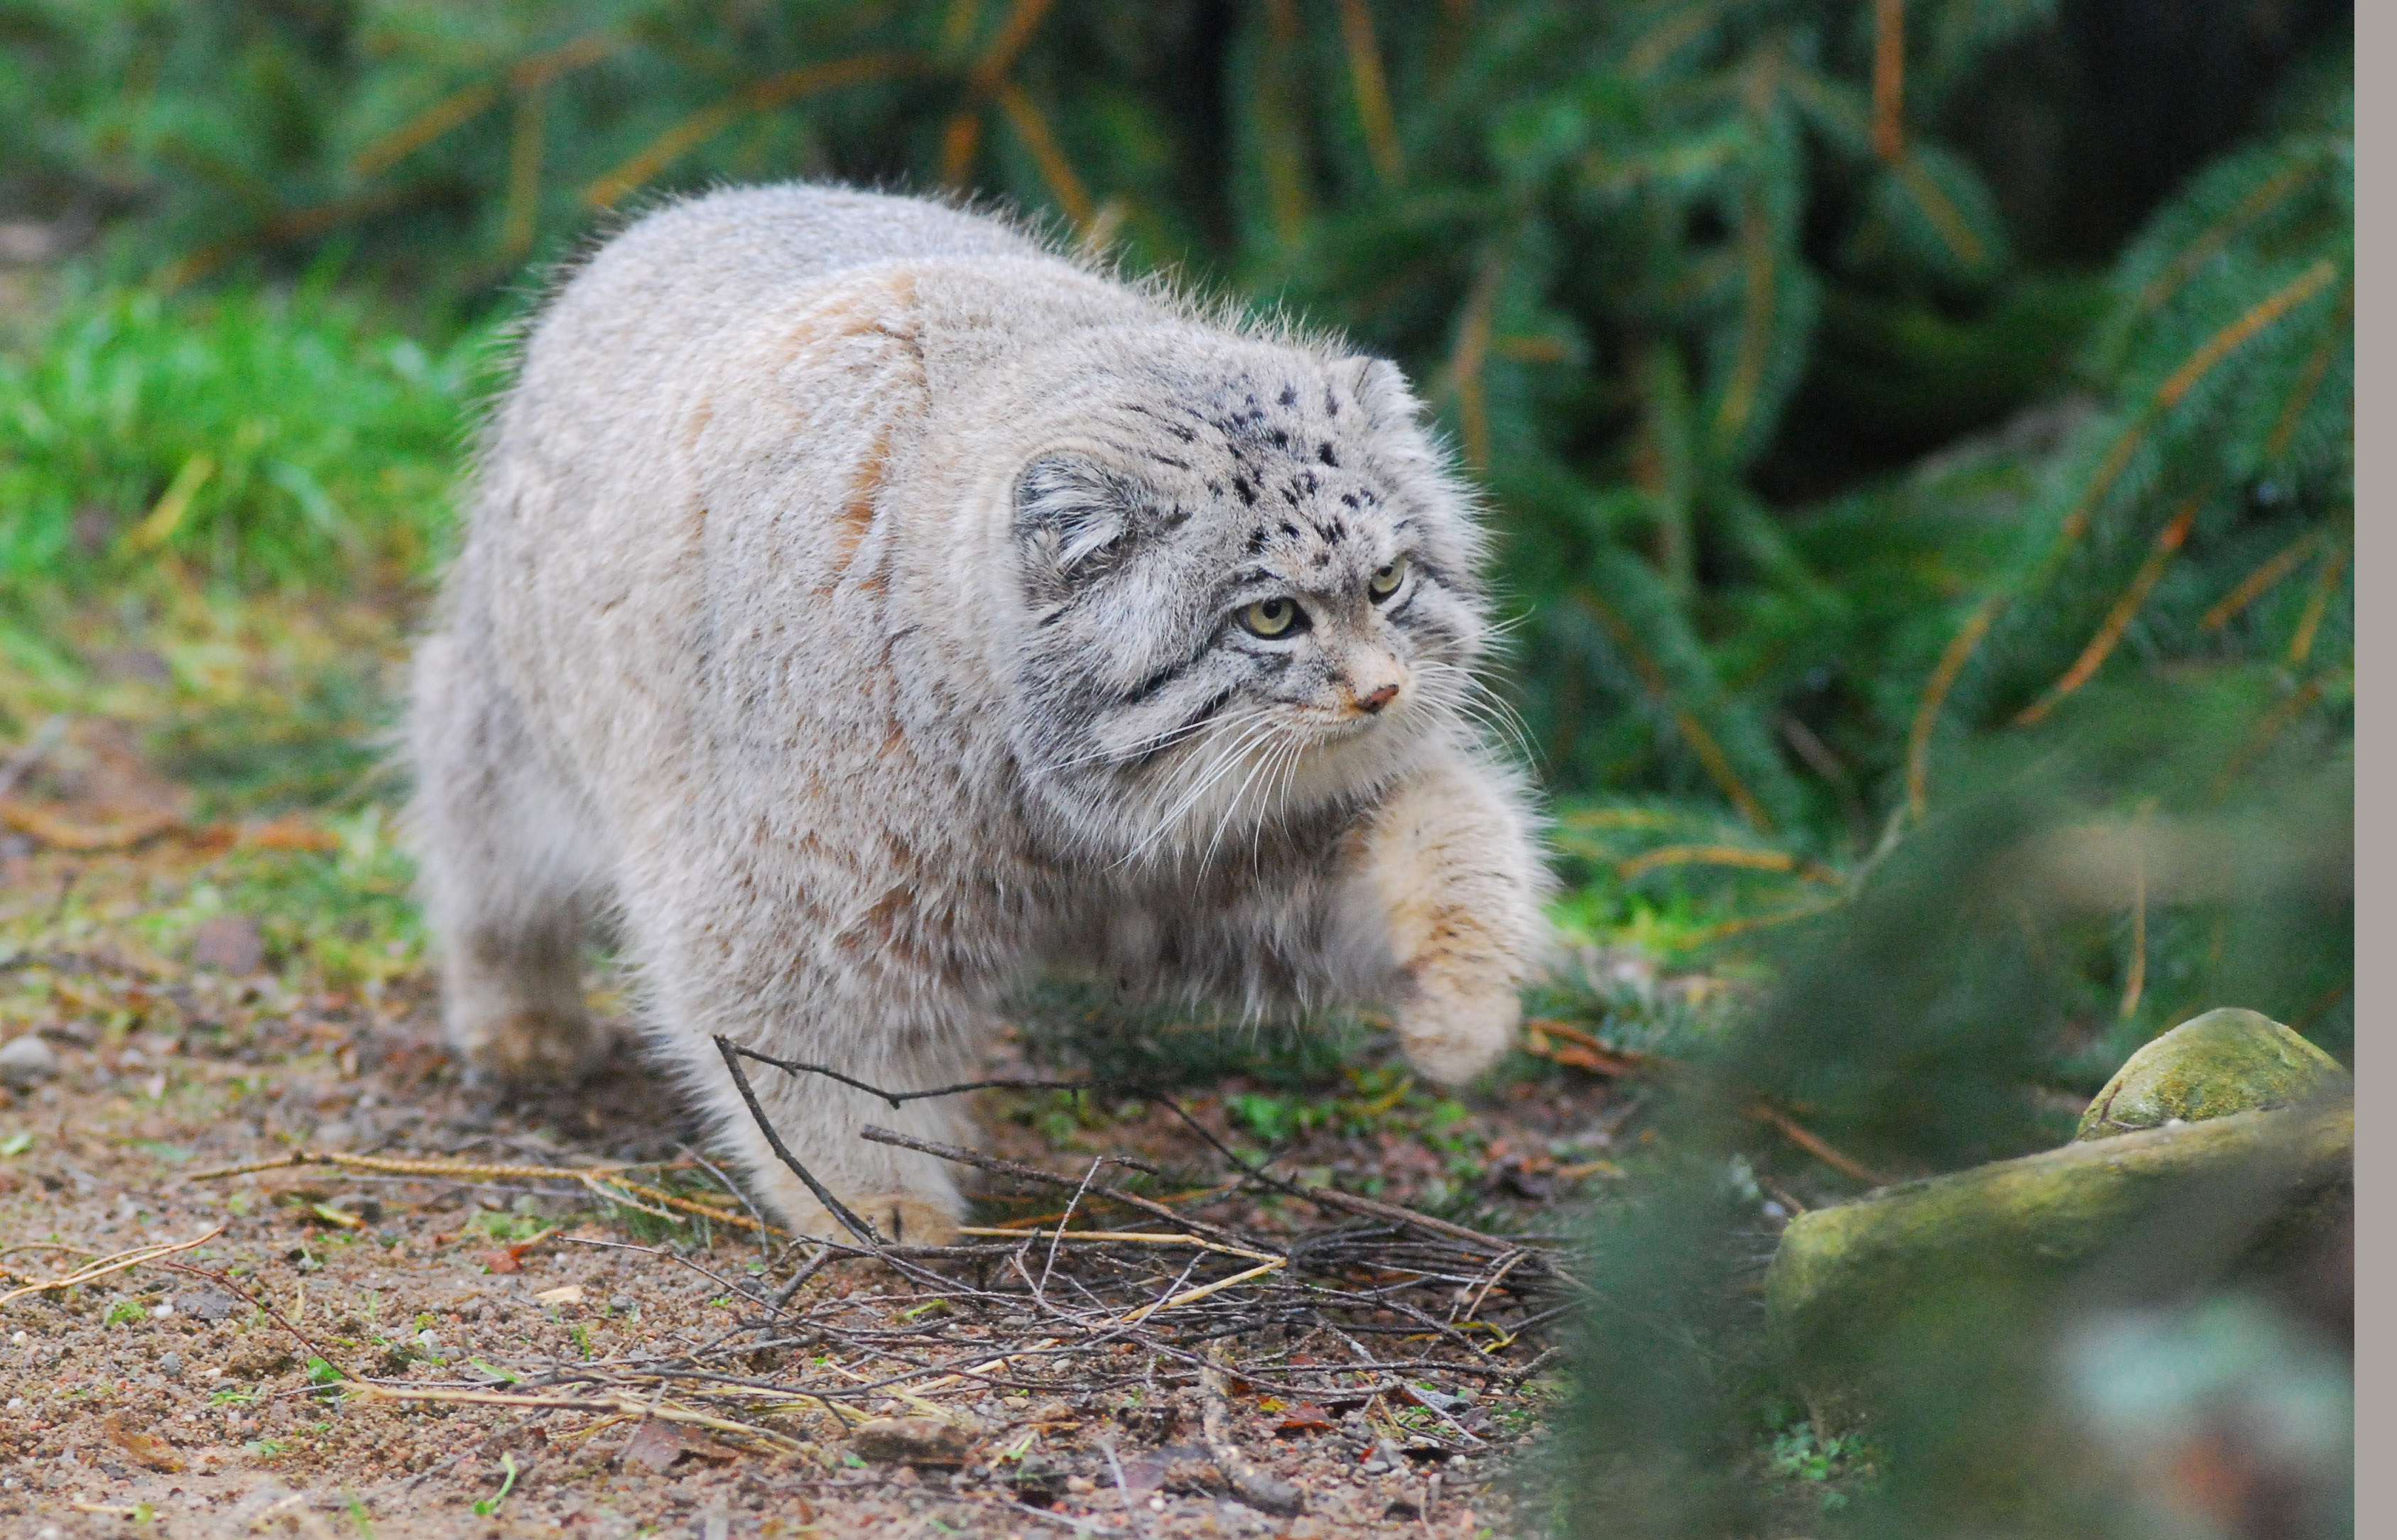 Scottish conservation experts to research Pallas's Cats in Mongolia